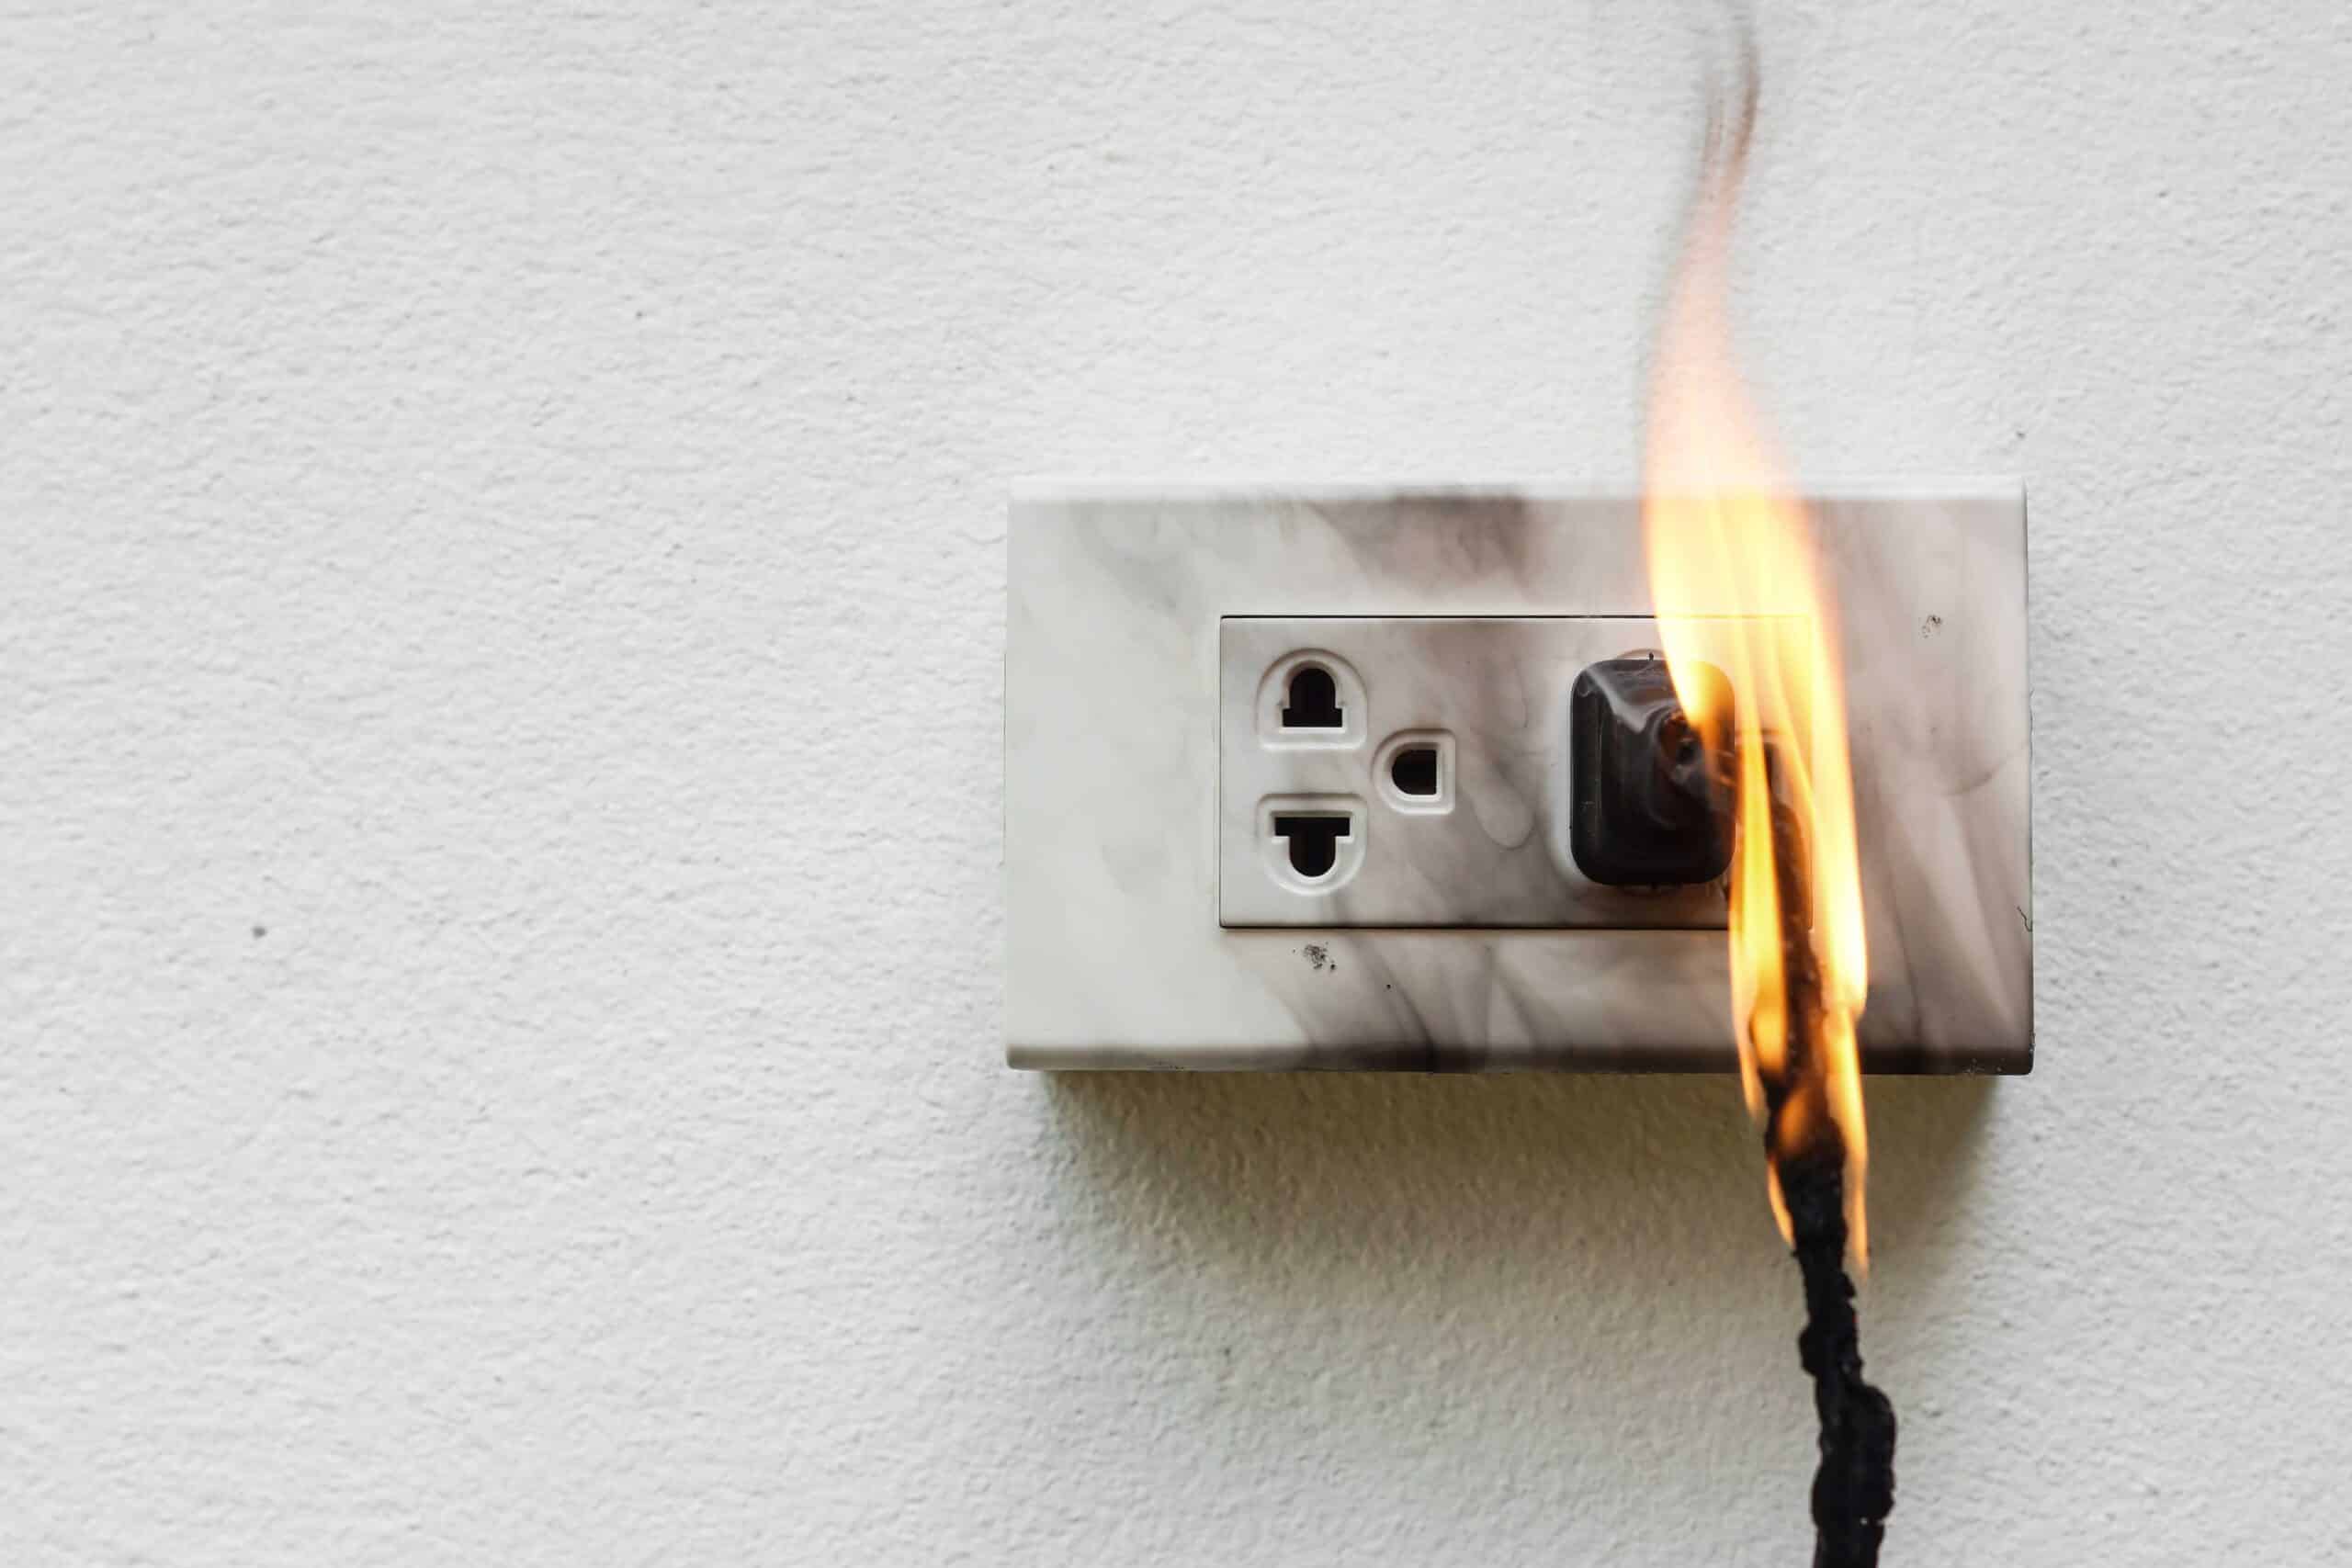 Outlet caught on fire